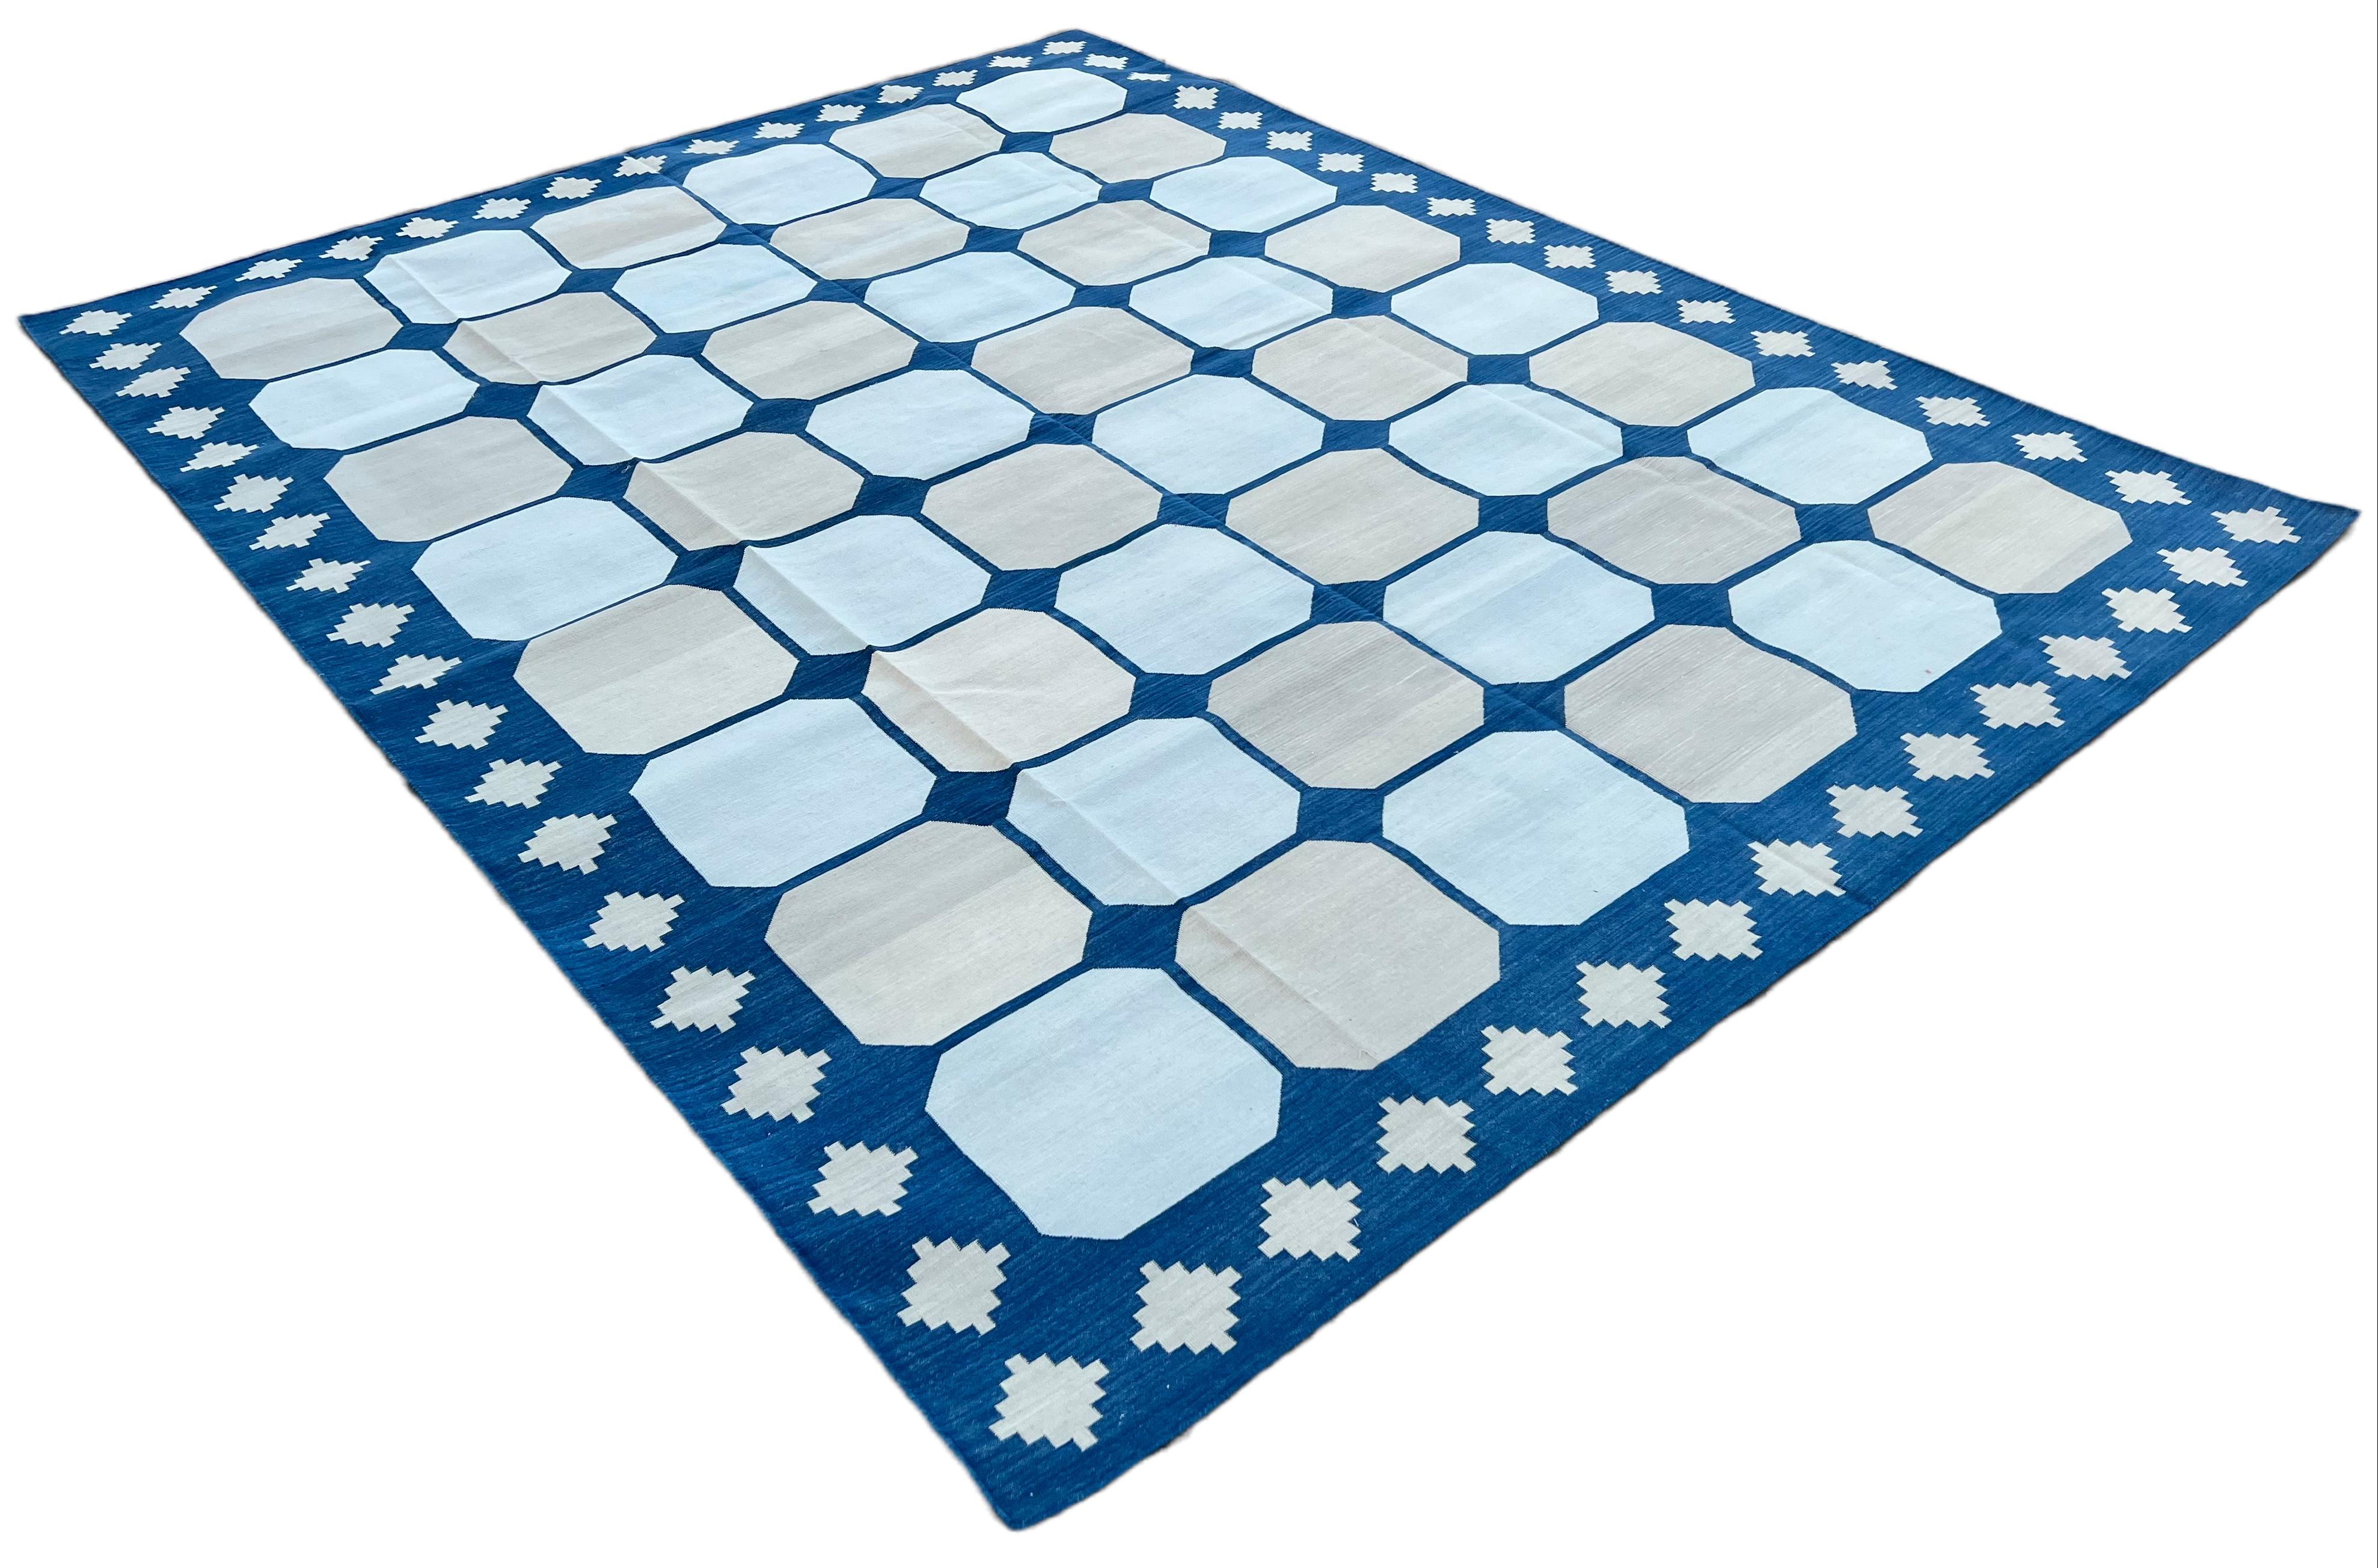 Cotton Vegetable Dyed Reversible Blue, Beige And Cream Geometric Patterned Tile Indian Rug - 8'x10'
These special flat-weave dhurries are hand-woven with 15 ply 100% cotton yarn. Due to the special manufacturing techniques used to create our rugs,